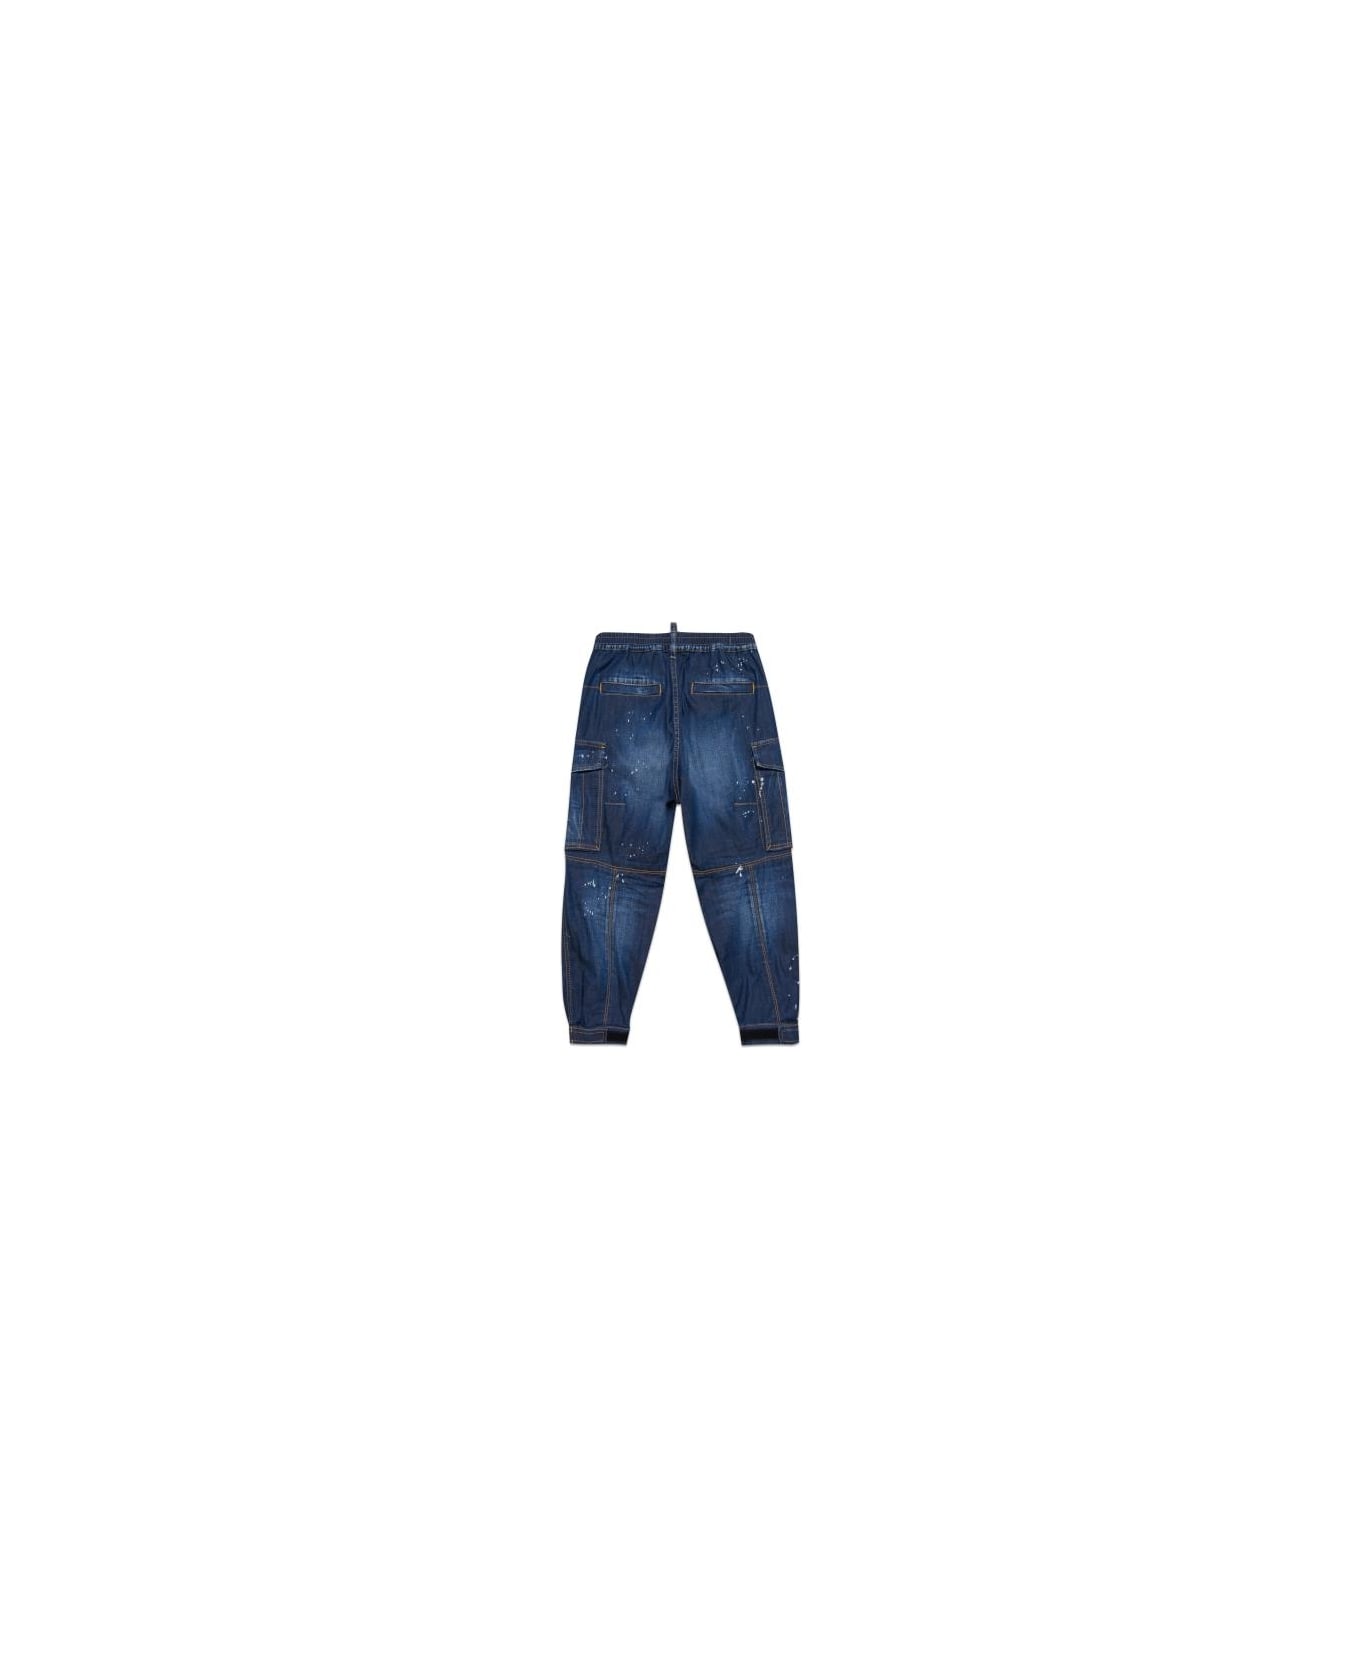 Dsquared2 Wide Leg Jeans - Blue ボトムス